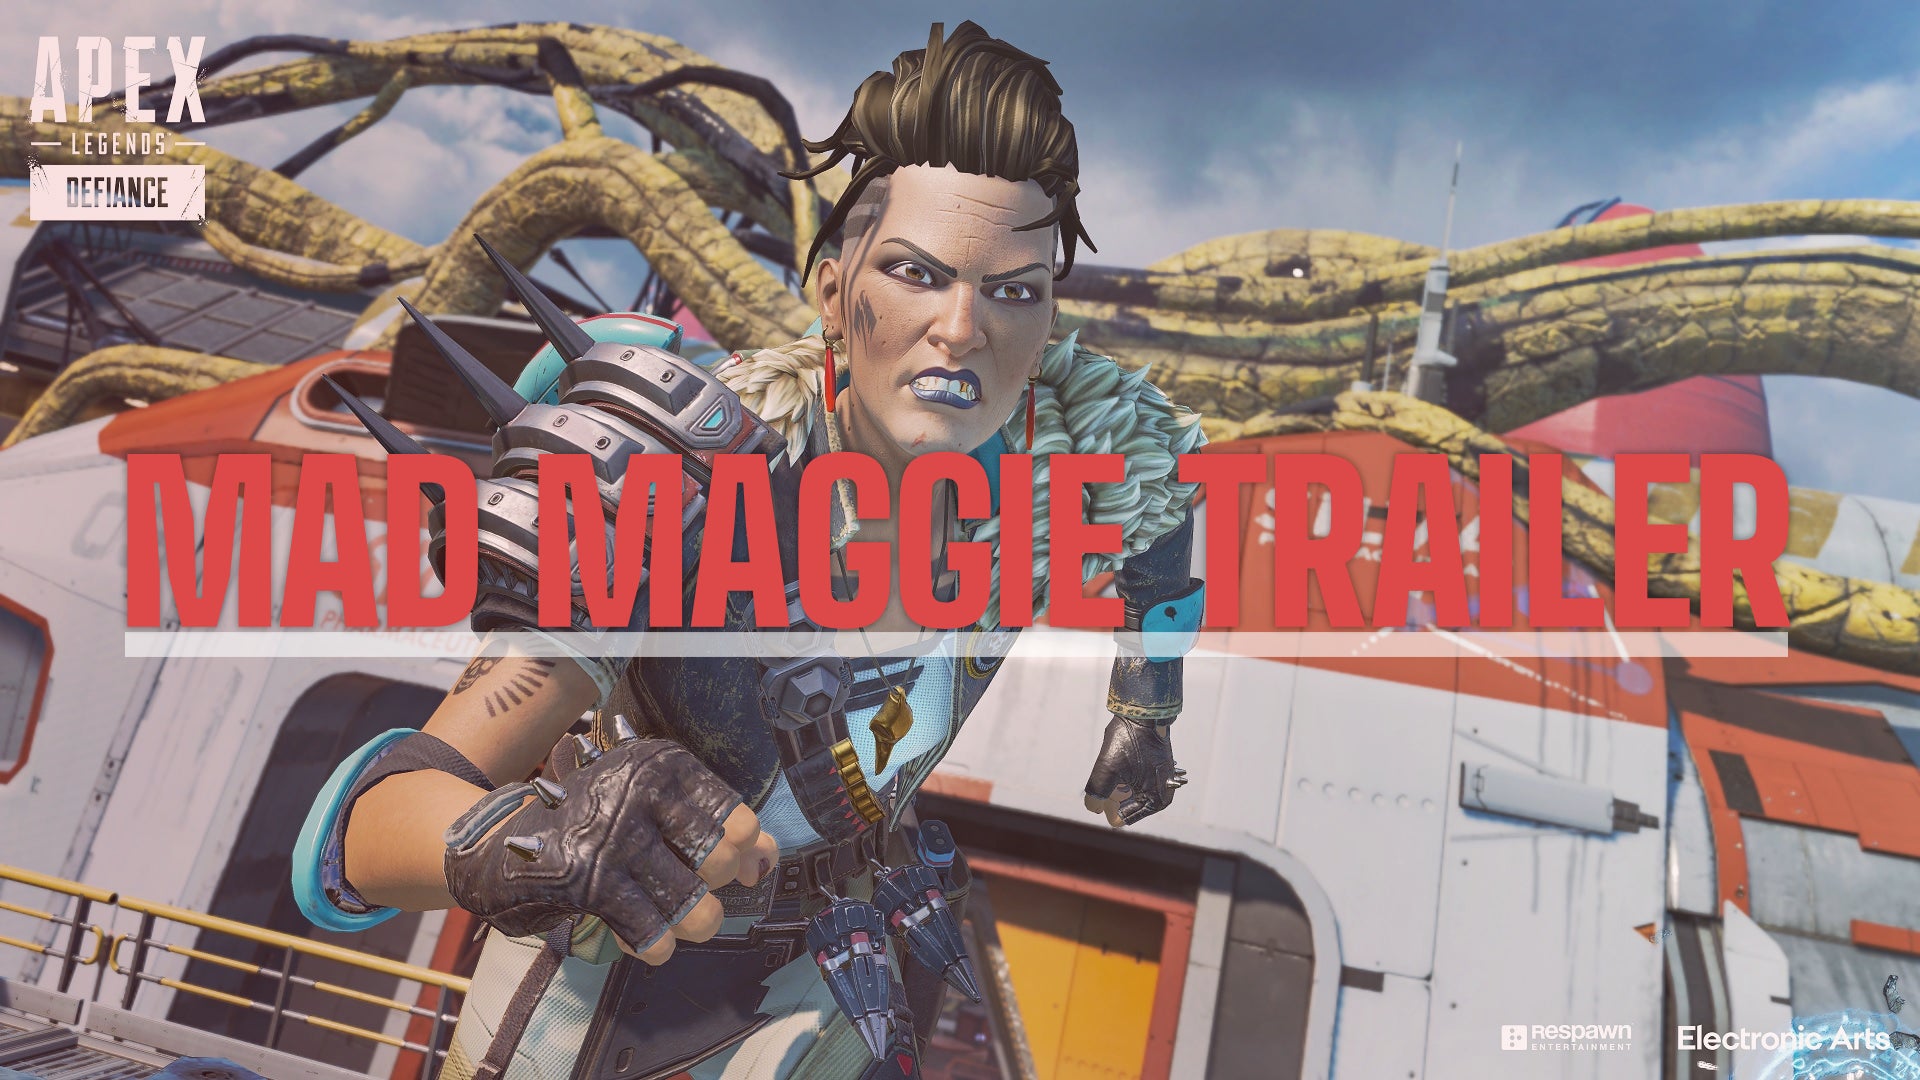 Apex Legends: Mad Maggie gameplay trailer has just gone live! - VG247